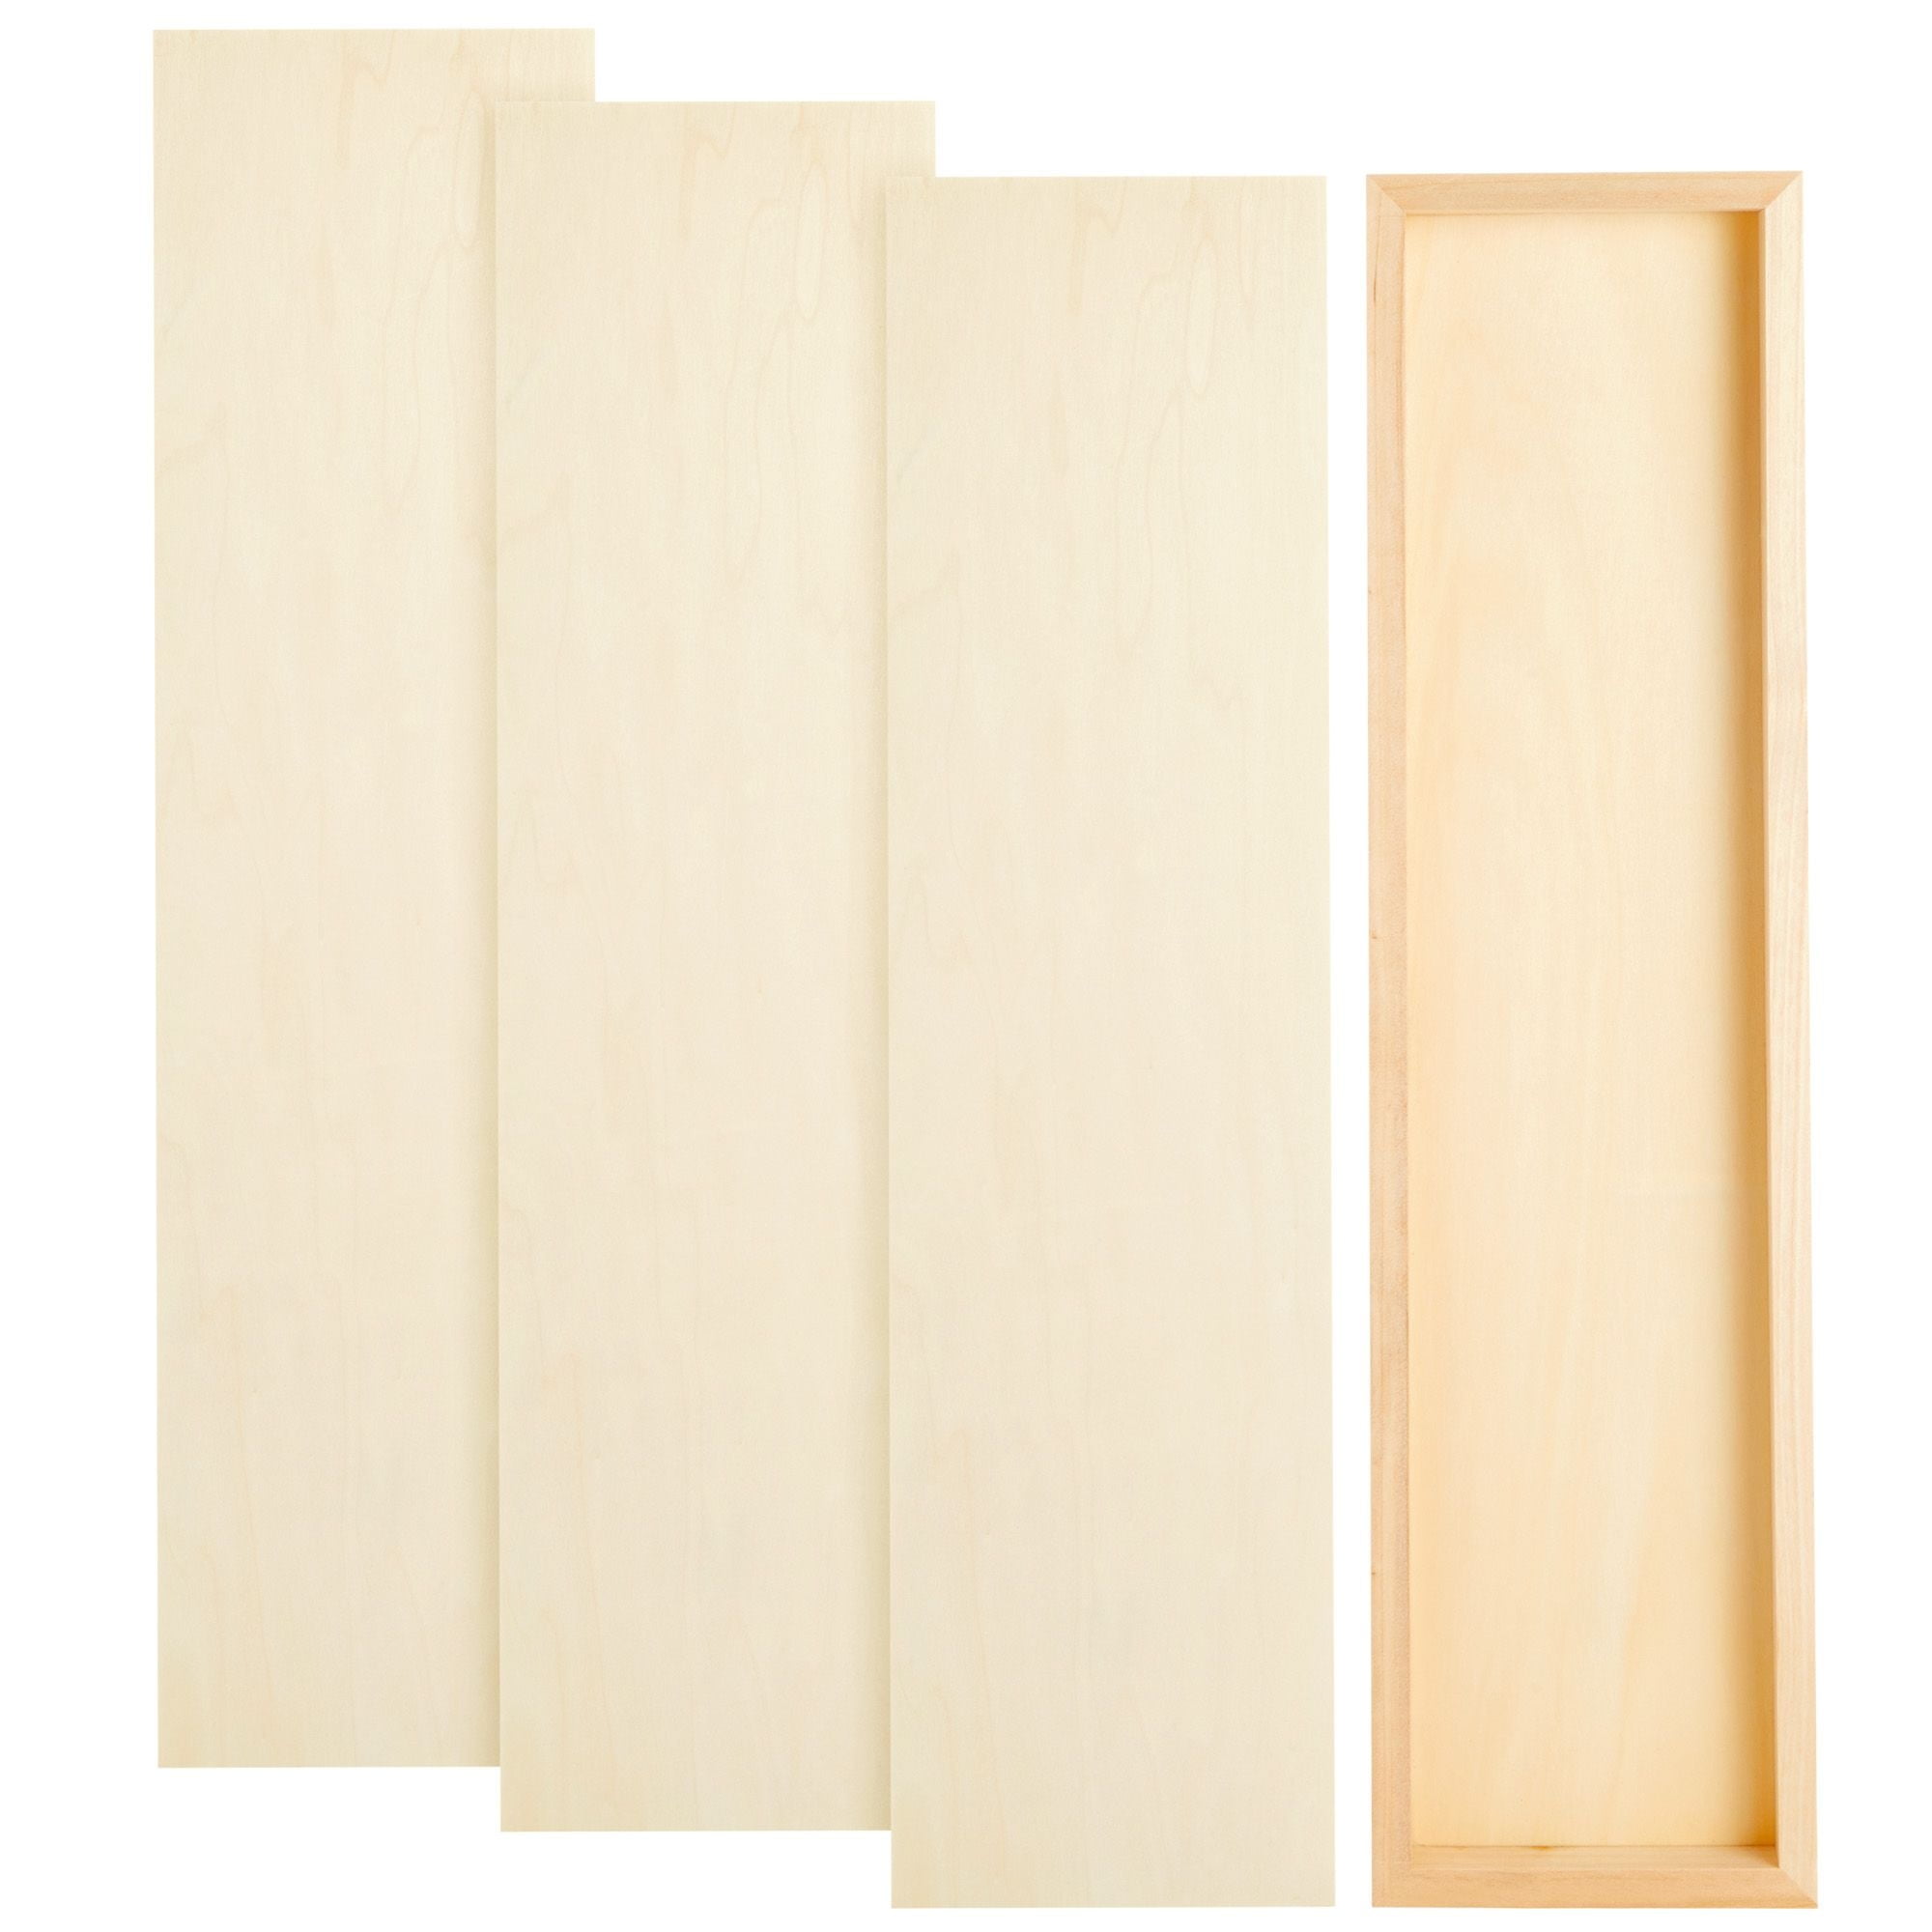 Bright Creations Set Of 8 Unfinished Wood Canvas Boards For Painting, Wooden  Panels For Crafts, Diy Signs In 4 Sizes : Target